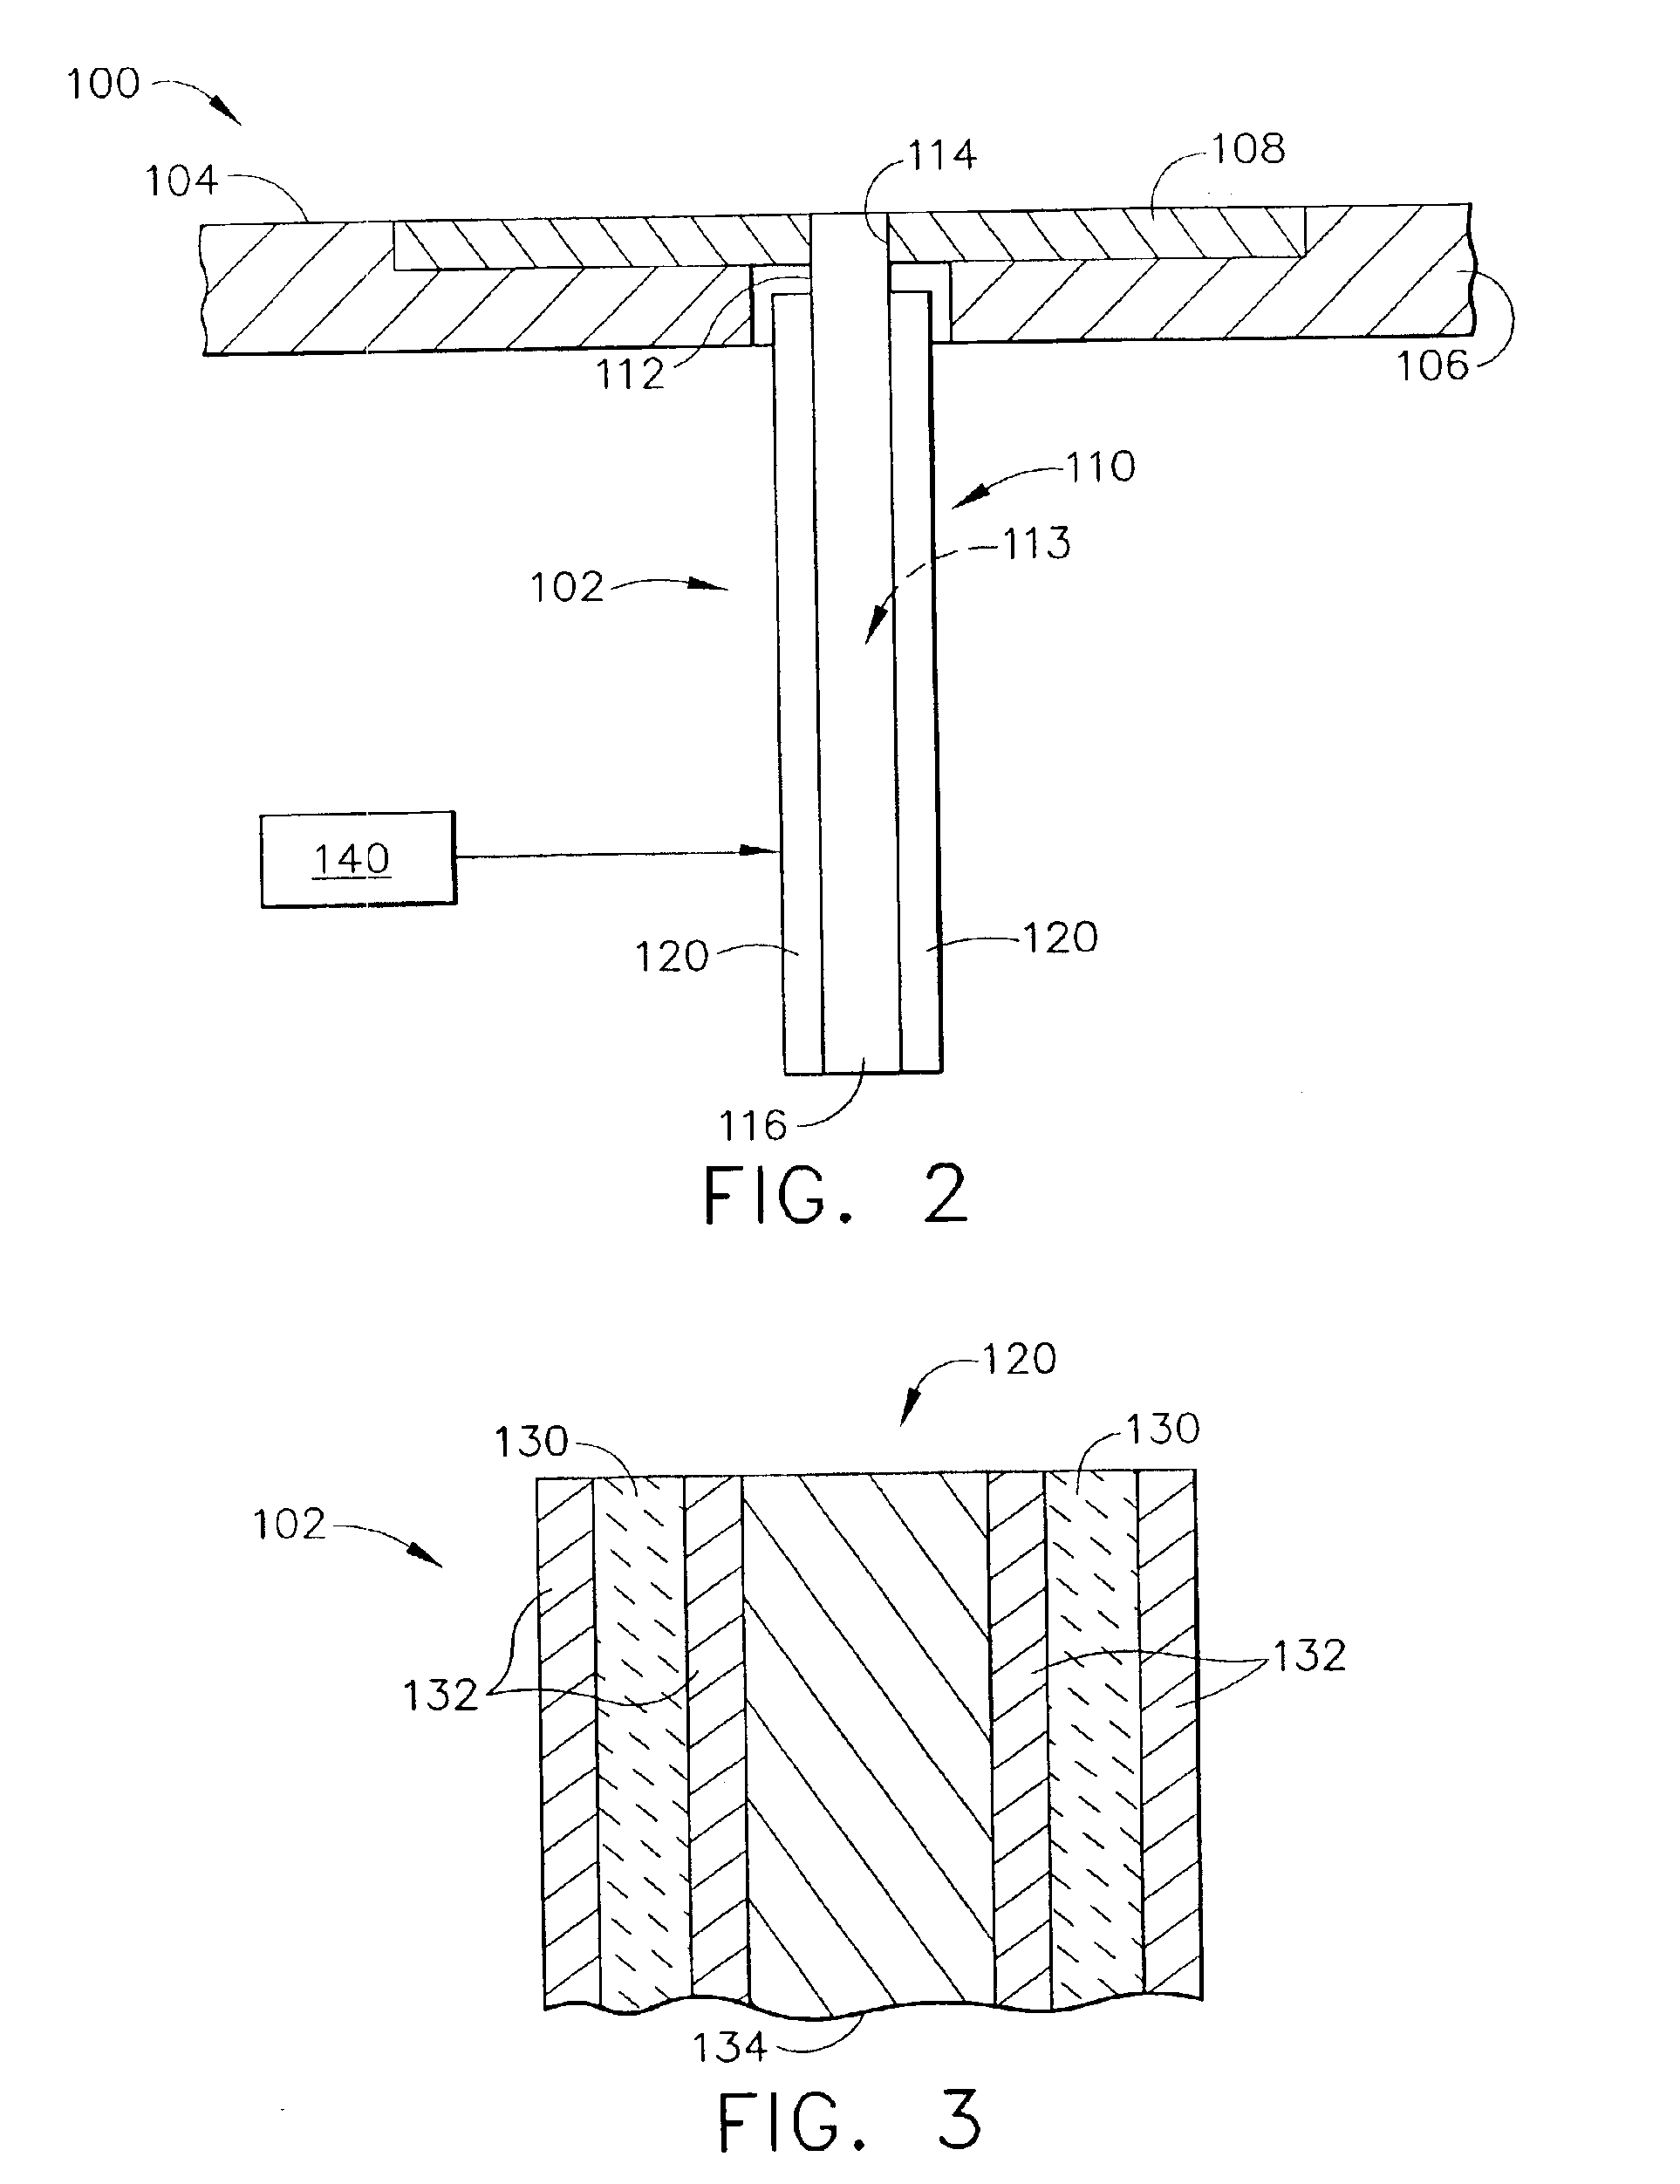 Method and apparatus for noise attenuation for gas turbine engines using at least one synthetic jet actuator for injecting air